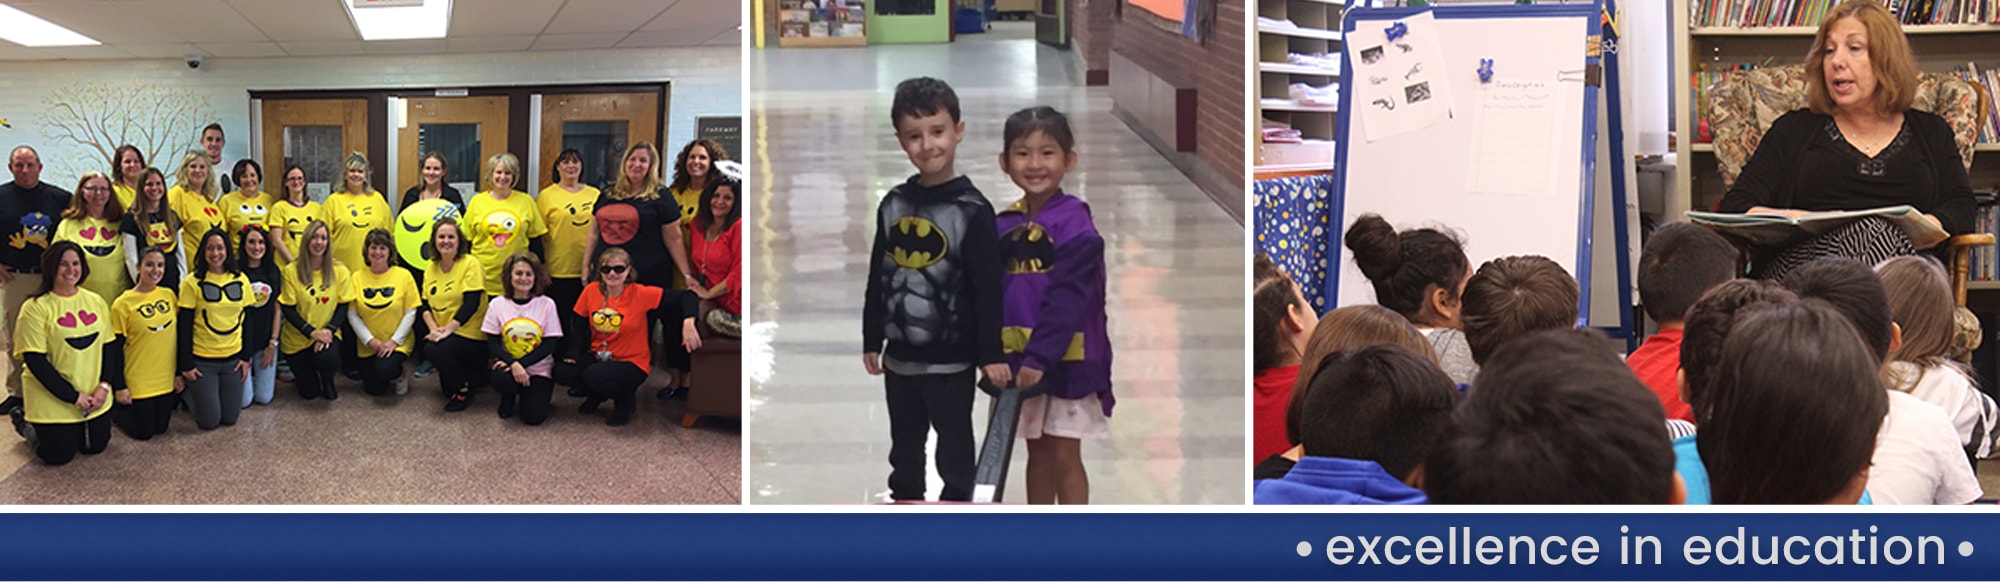 Teachers wearing emoji shirts pose together, two students wearing Batman attire pose together and a teacher reads to students in a classroom